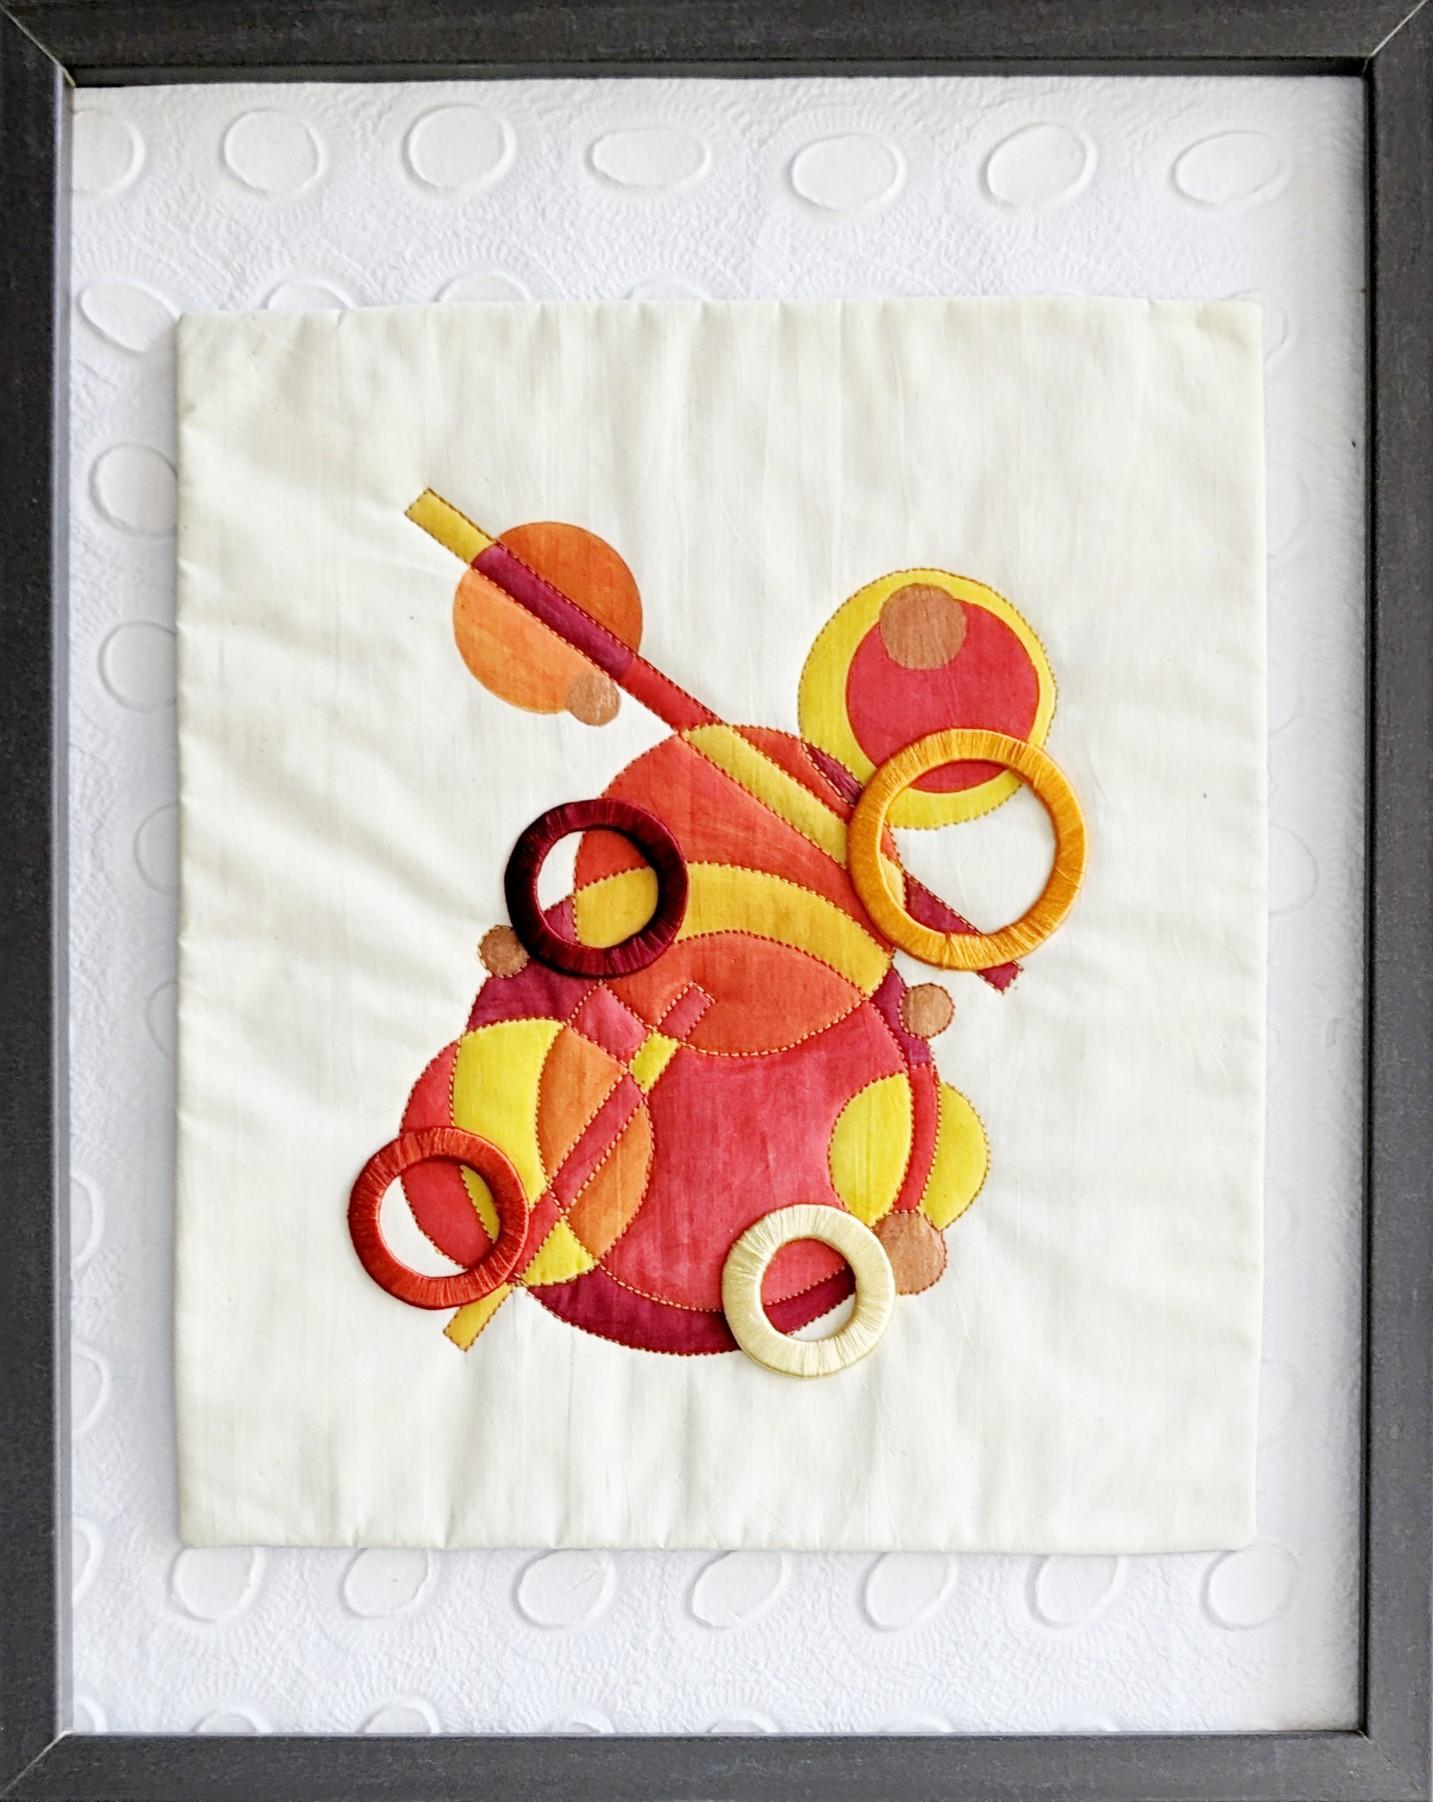 Painted quilt with circles wrapped in silk thread. Mounted onto textured paper. 31 x 38cm